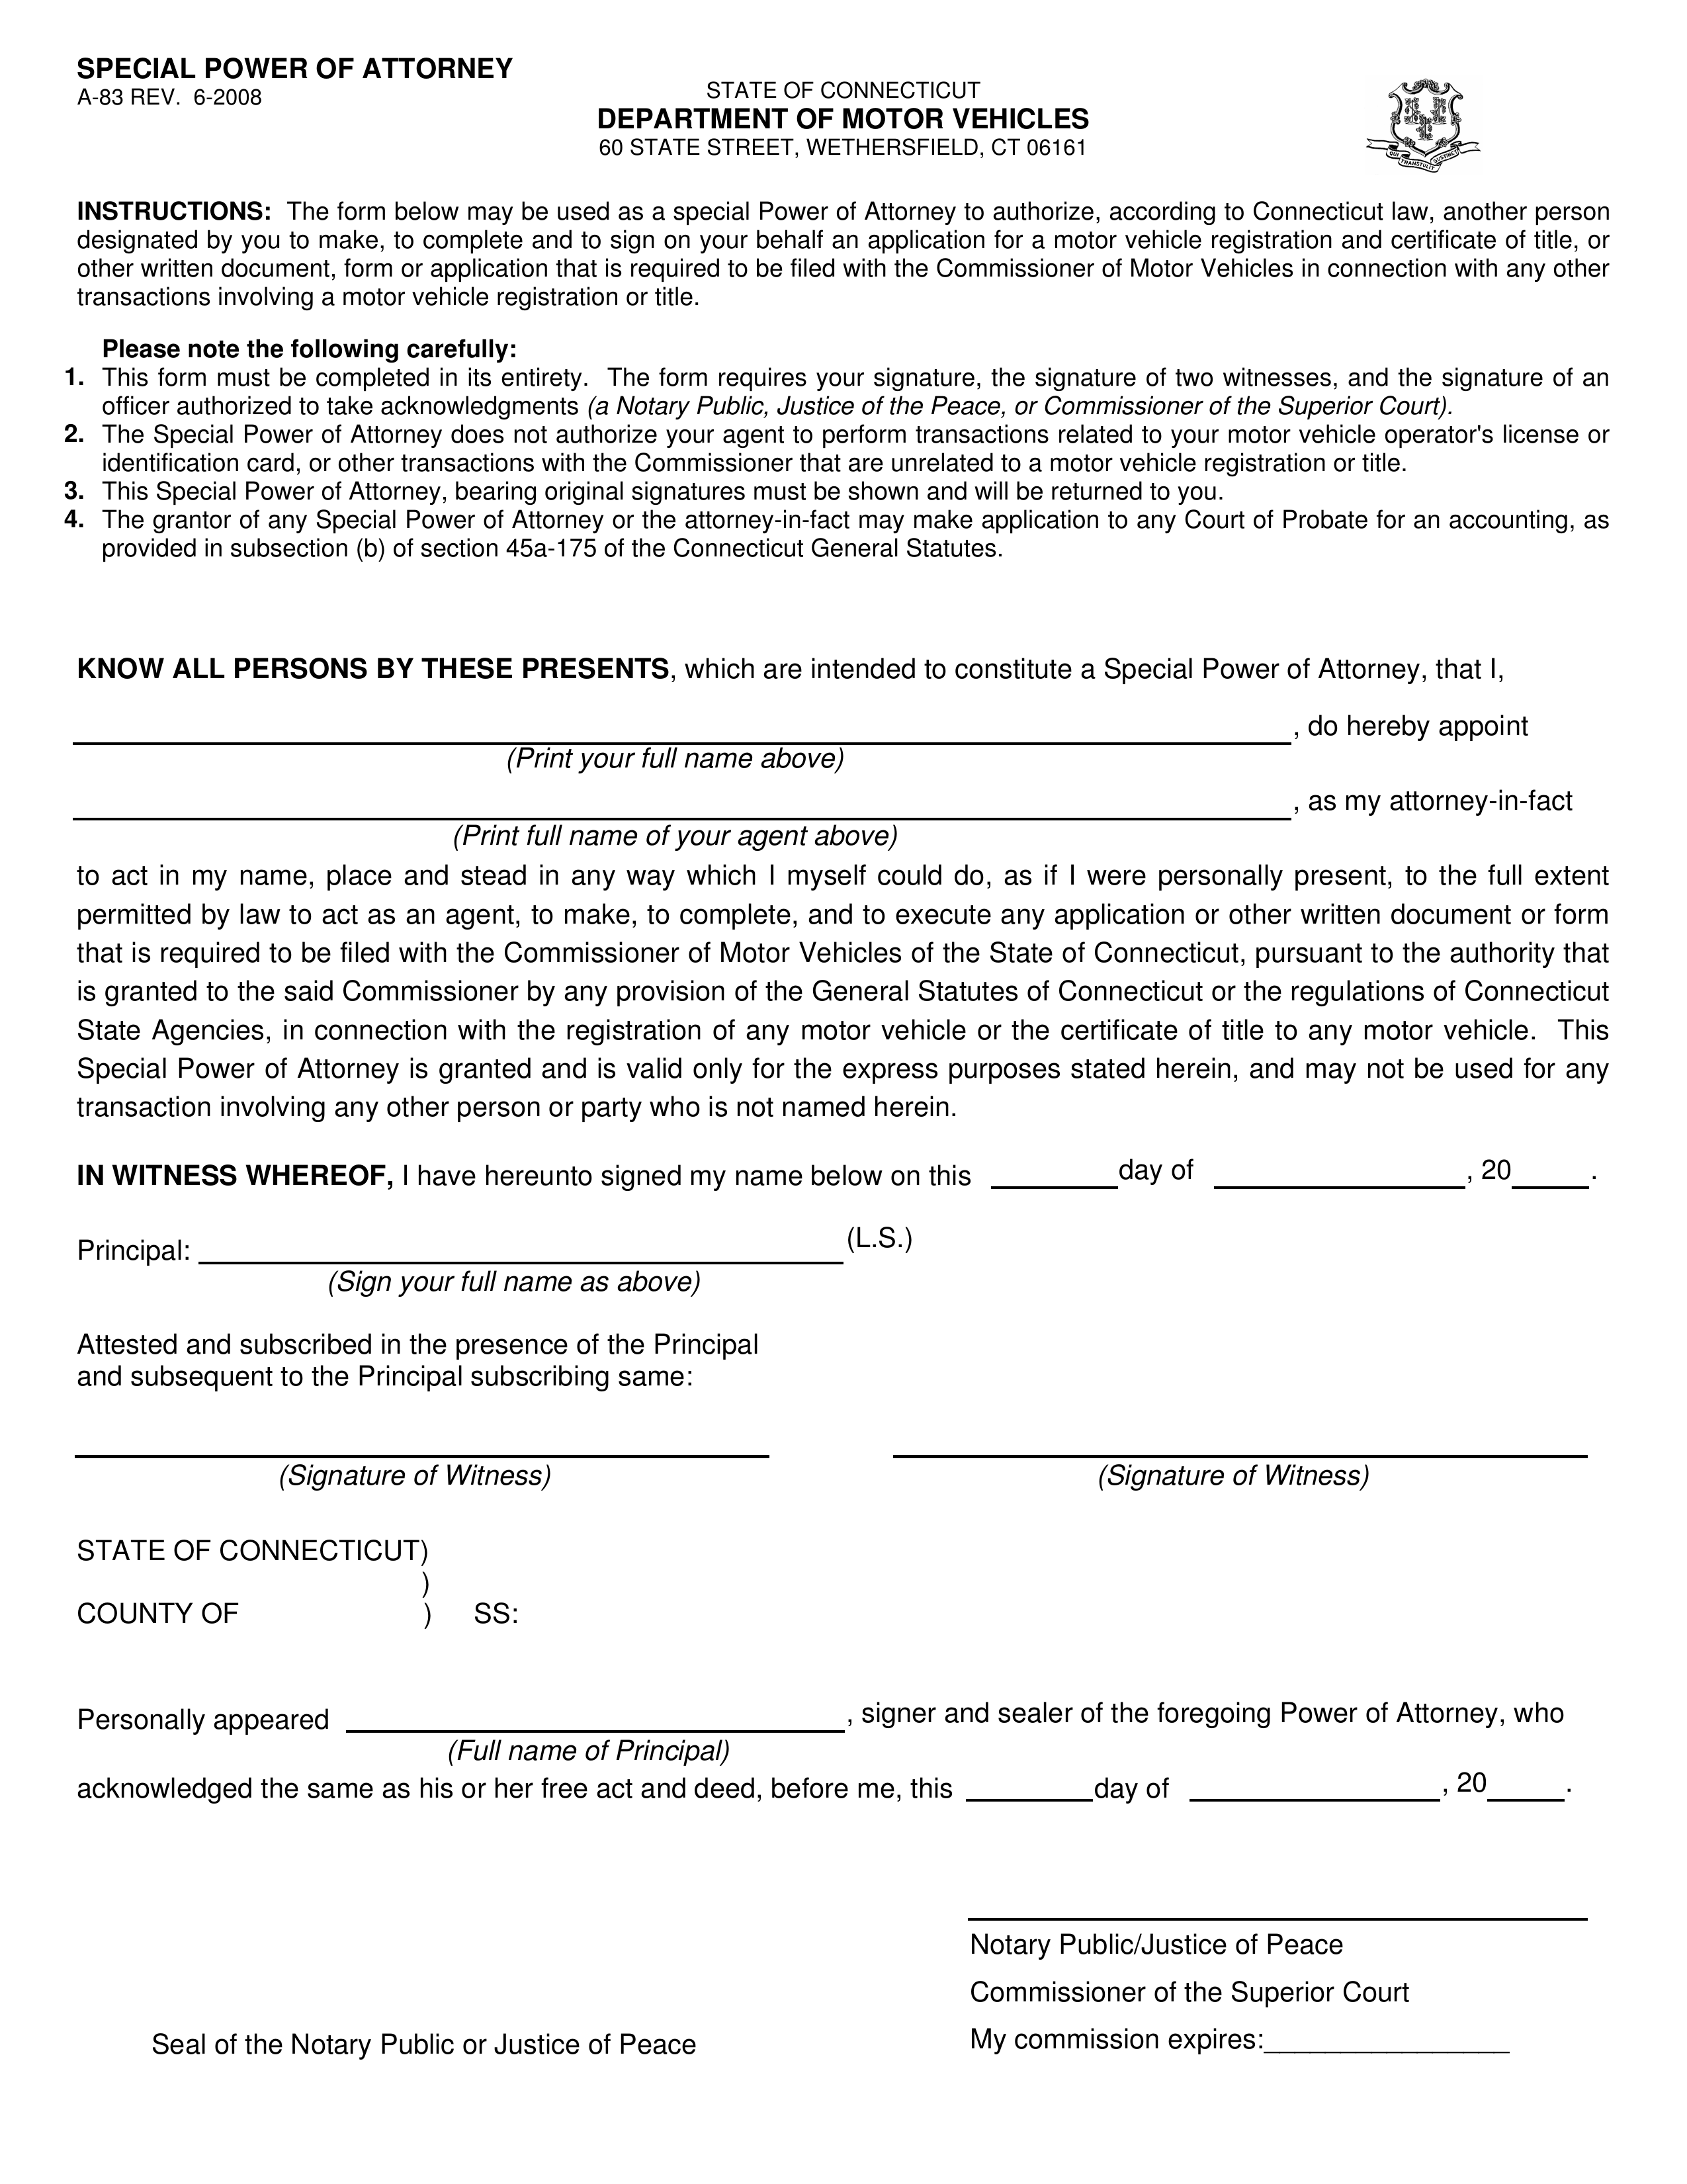 Connecticut Motor Vehicle Power of Attorney (Form A-83)